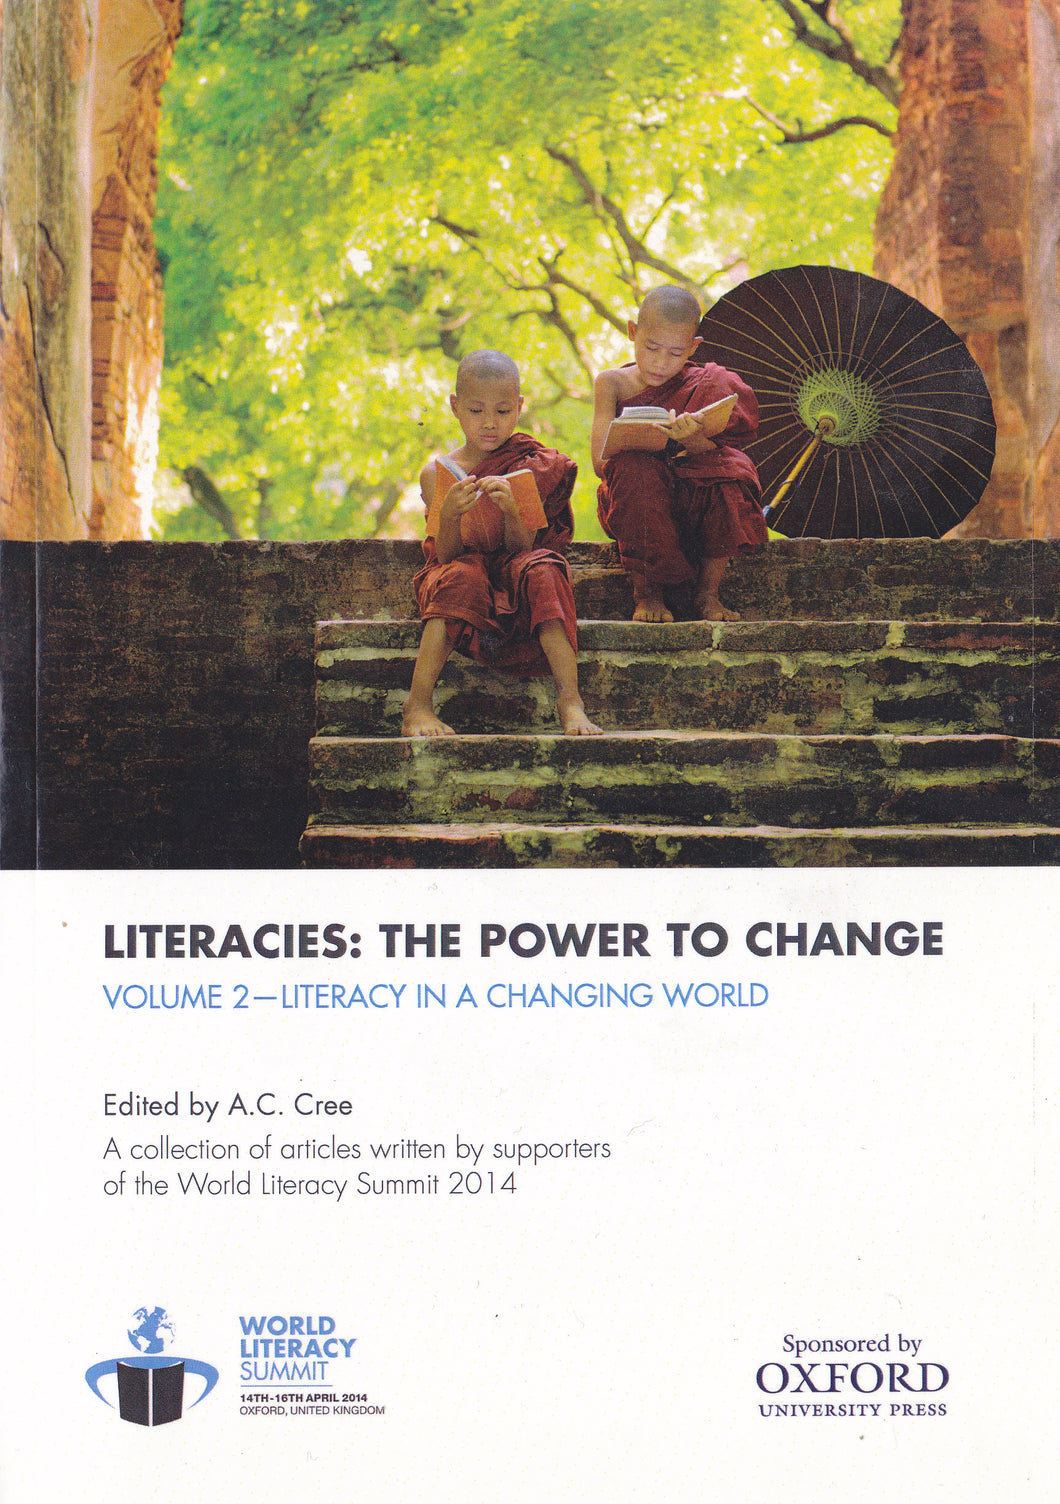 Literacies: the Power to Change (Volume 2 - Literacy in a Changing World)